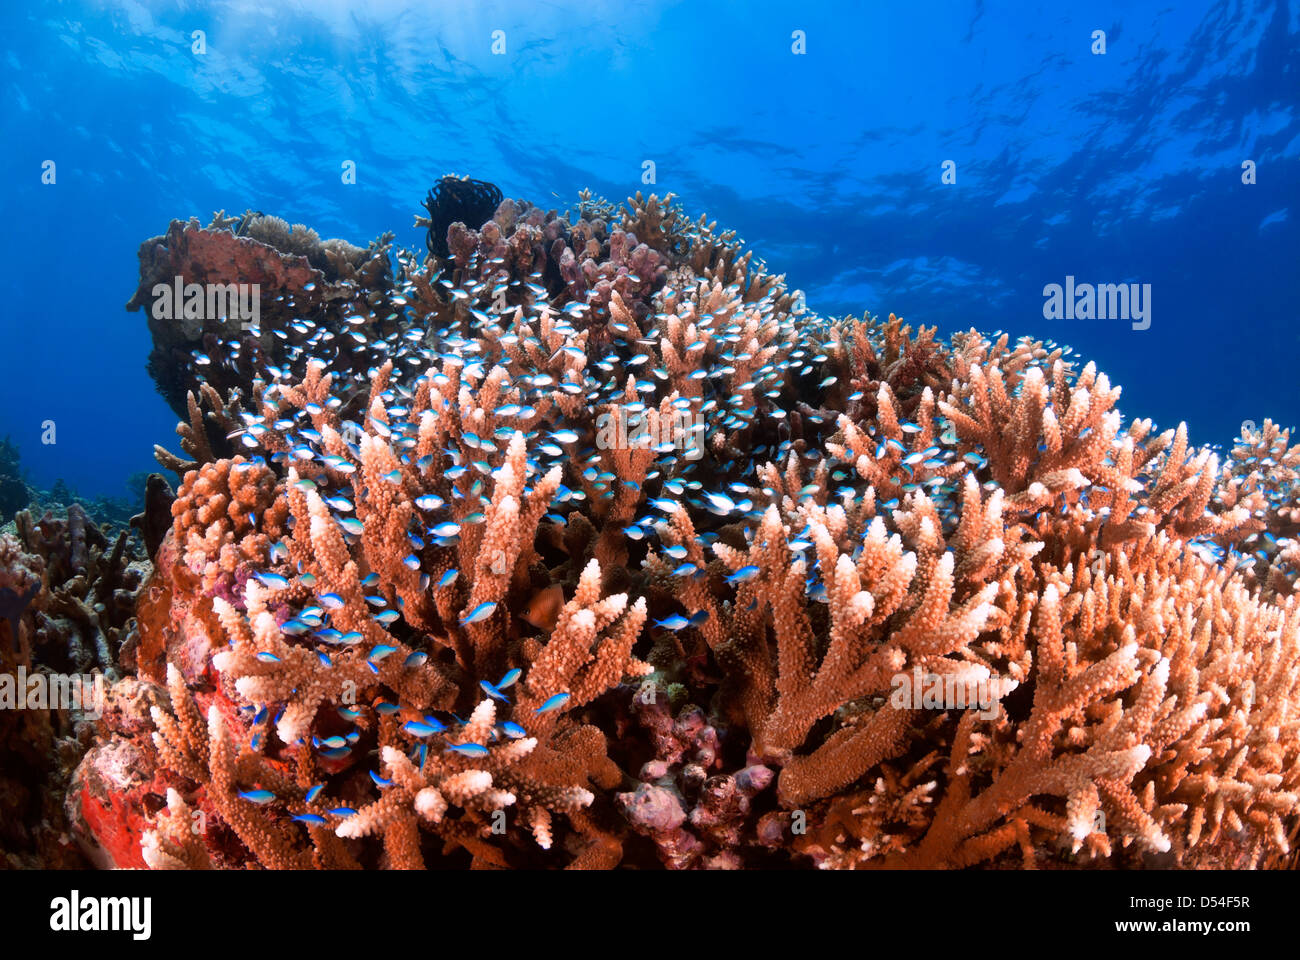 Staghorn Coral Reef with Reef Fish, Great Barrier Reef, Coral Sea, Pacific Ocean, Queensland, Australia Stock Photo